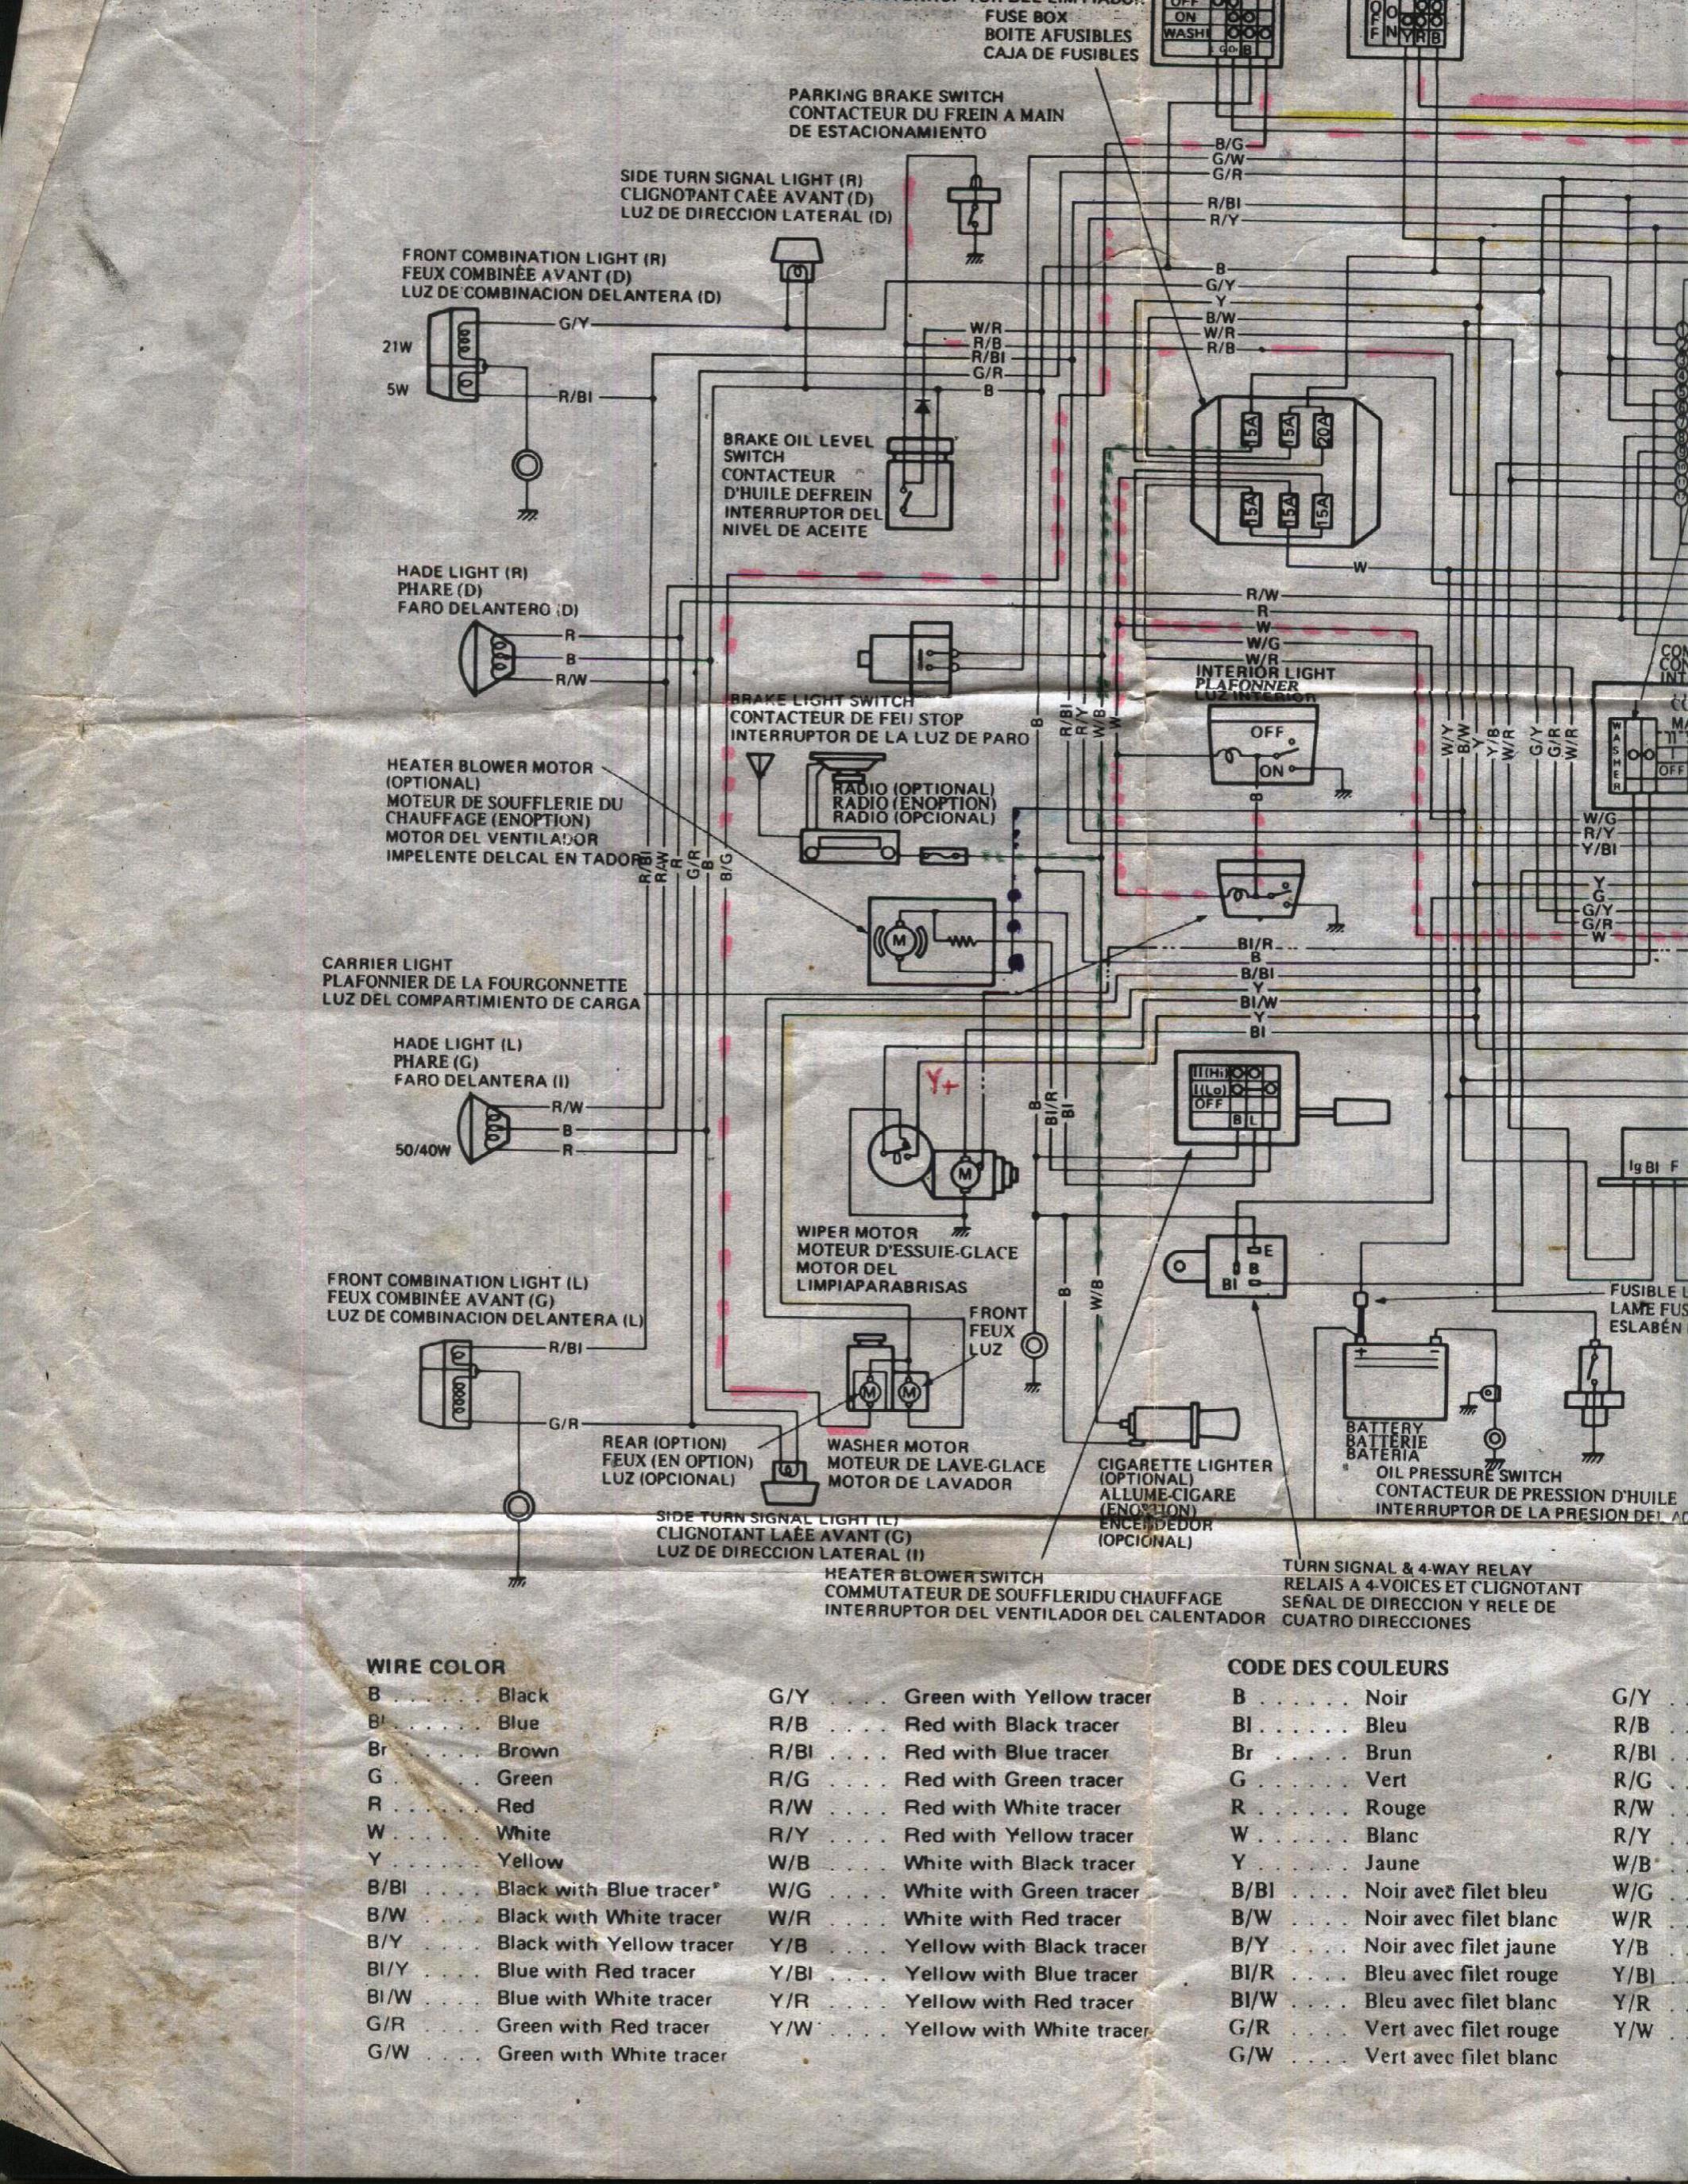 Suzuki Van 800CC Electrical Wiring diagram for Suzuki Van in Pakistan from 83 to 2009, only the name change to Bolan